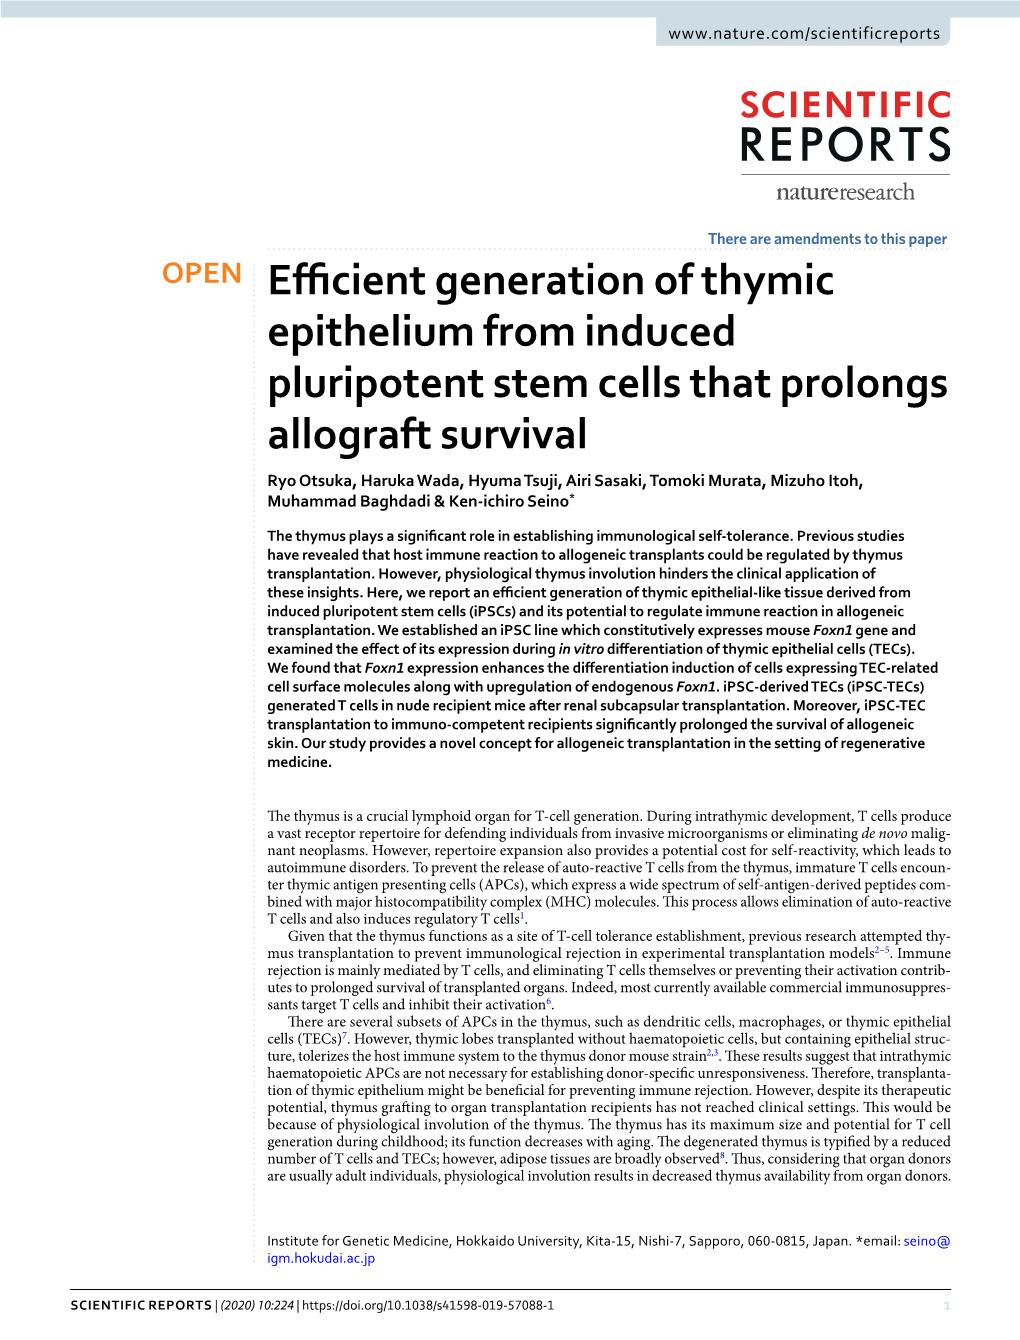 Efficient Generation of Thymic Epithelium from Induced Pluripotent